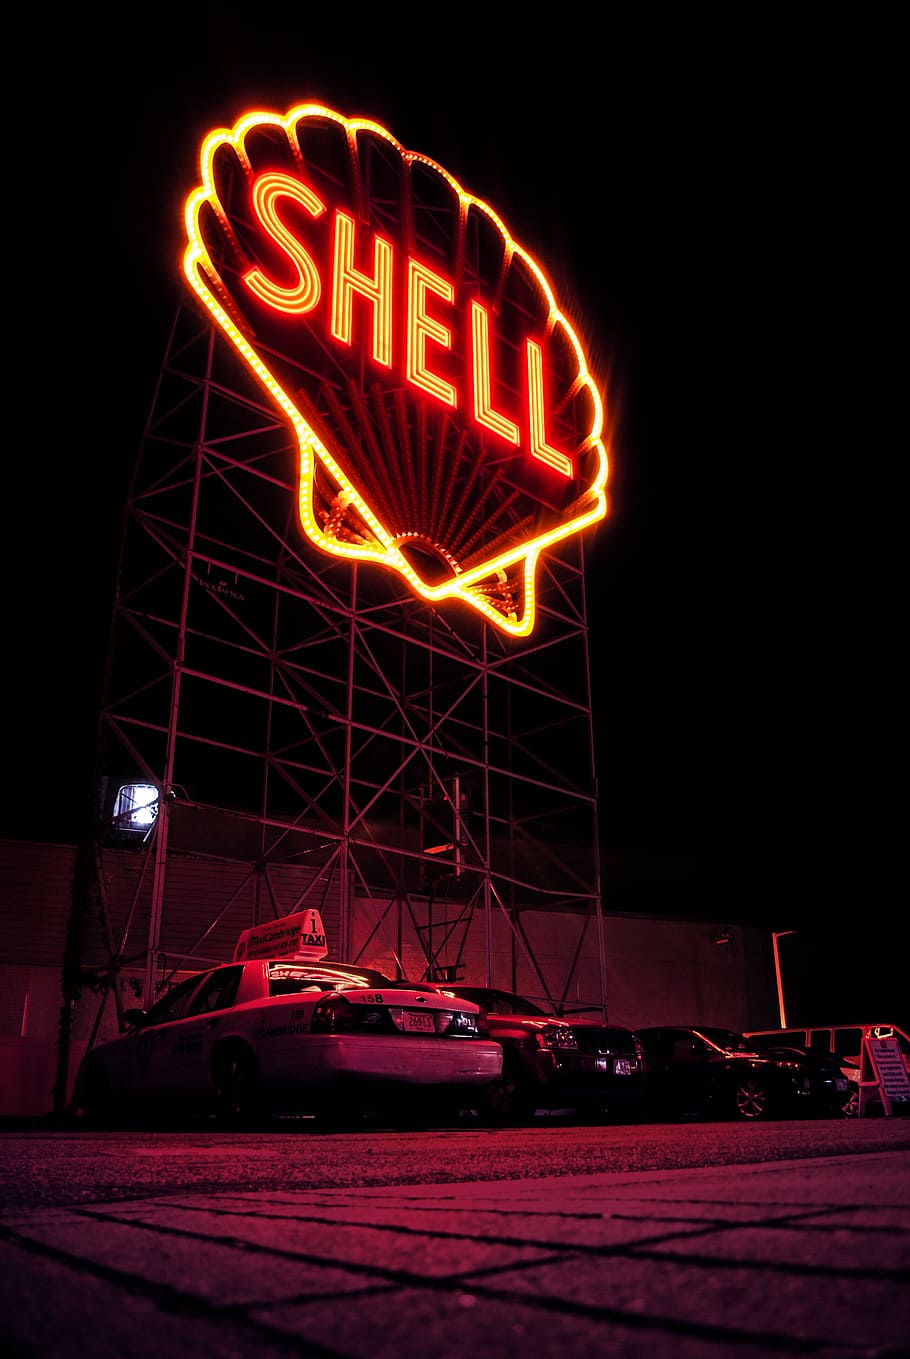 Shell LED signage, night, light, car, graphic, glow, taxi, neon